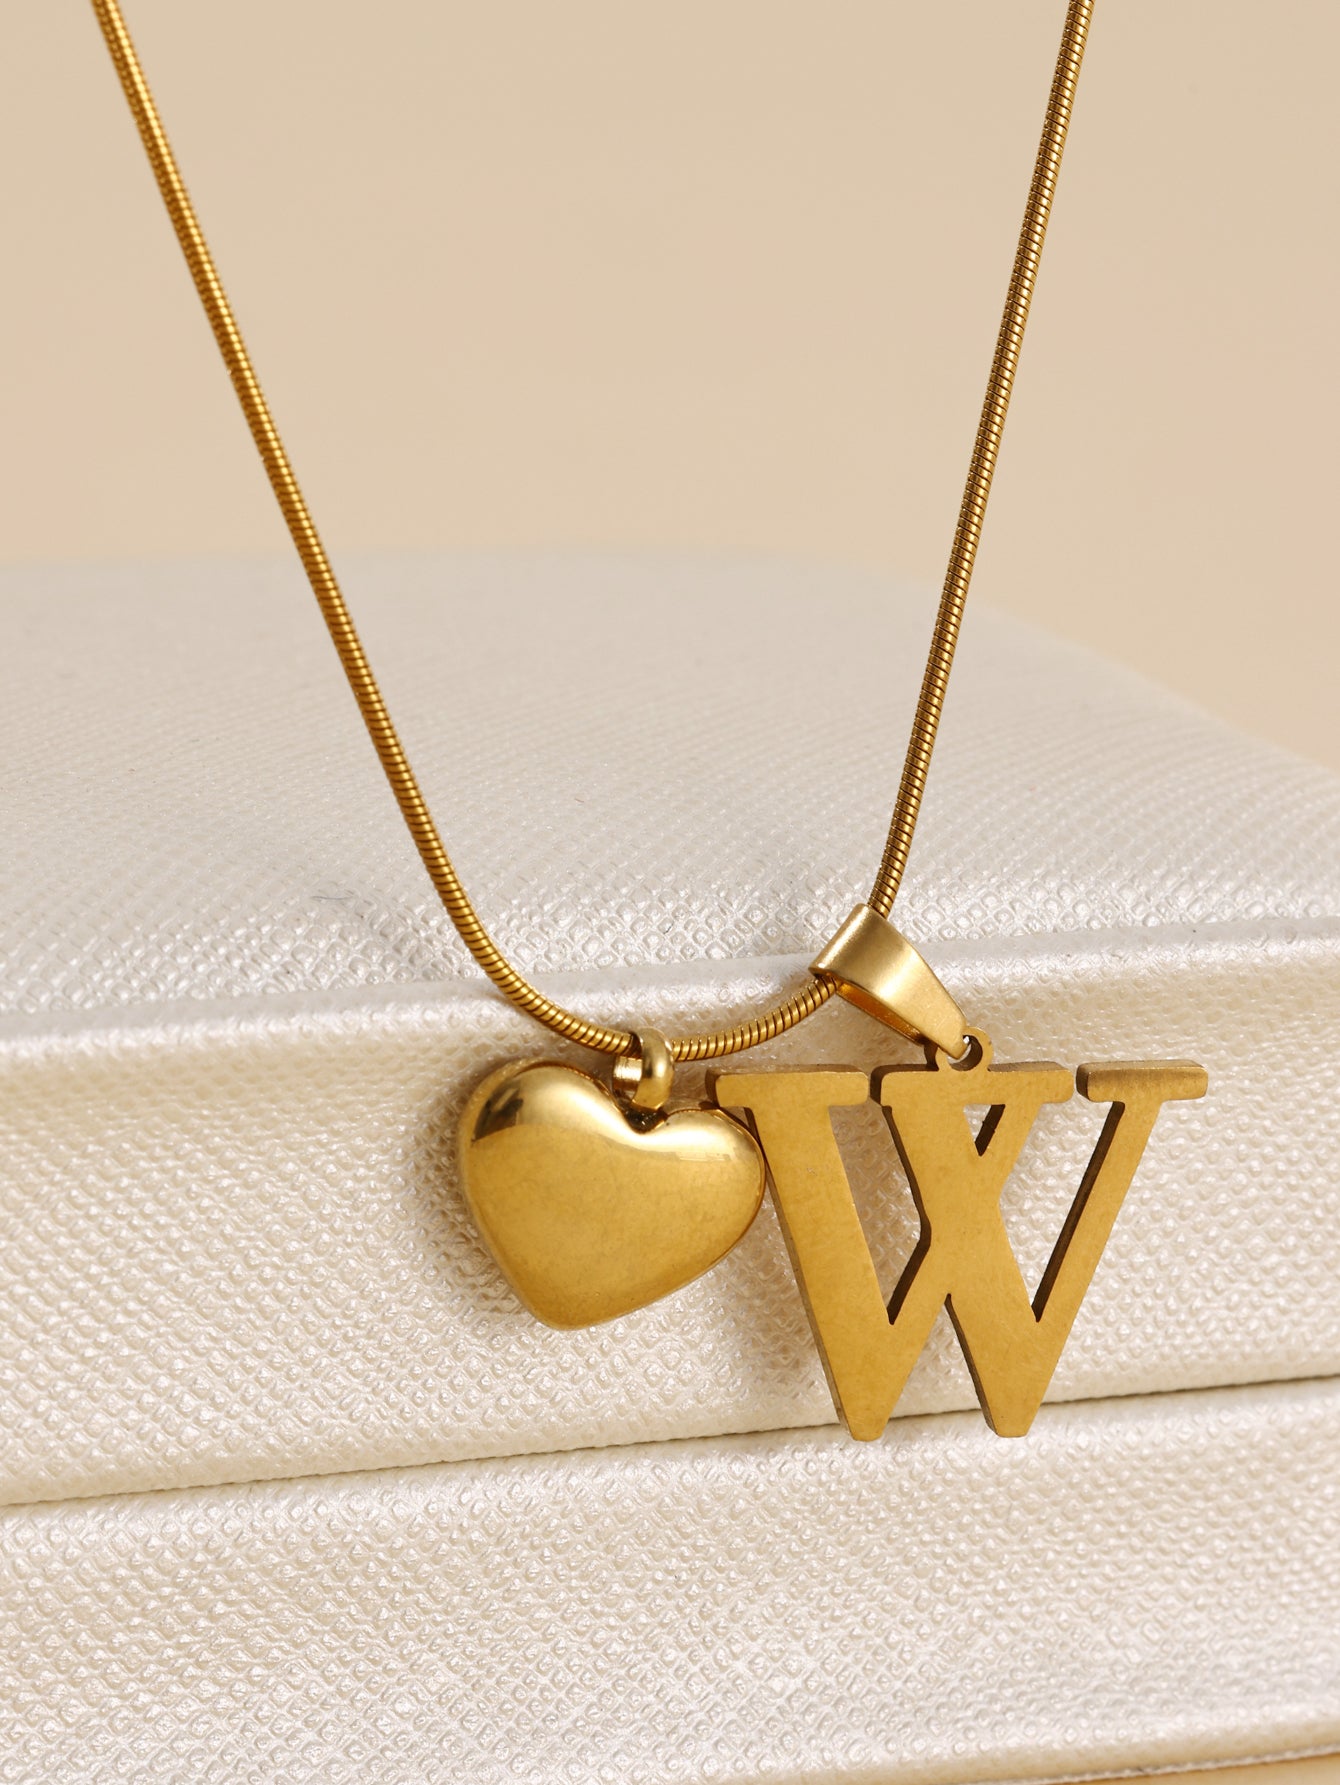 Stainless Steel Copper 18K Gold Plated IG Style Letter Heart Shape Pendant Necklace